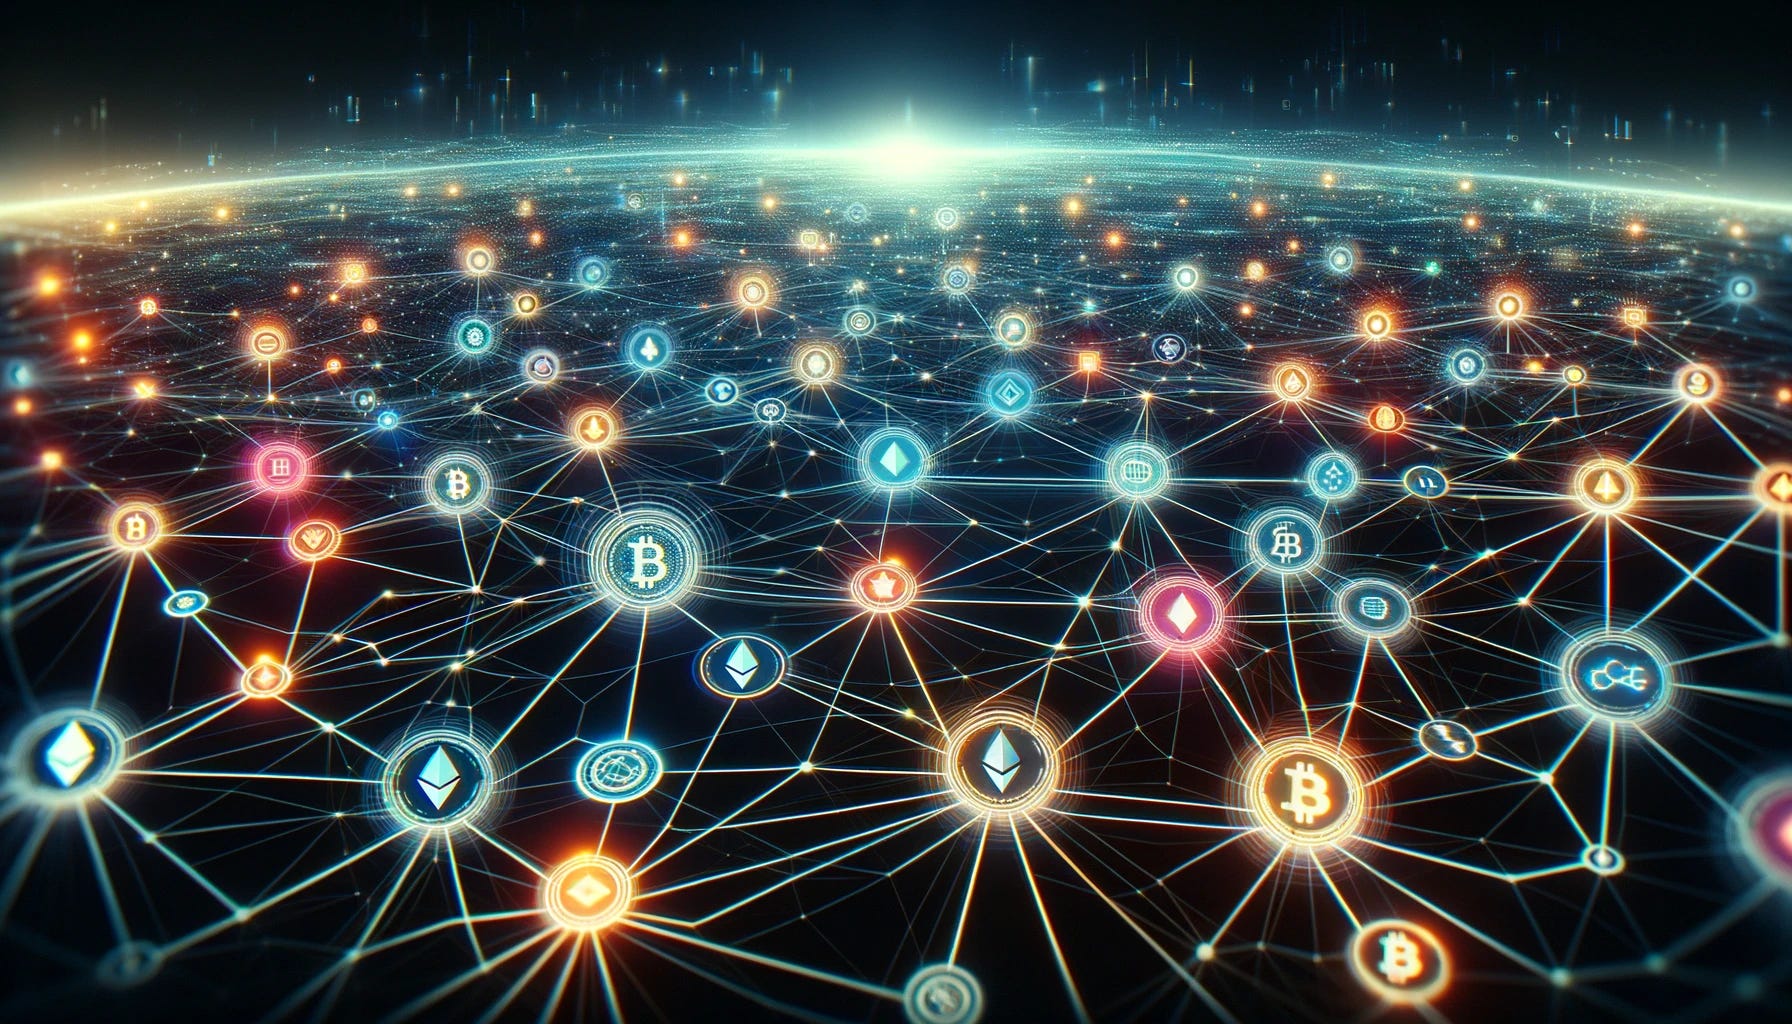 Visualize a futuristic, digital web of different blockchains connecting with each other in a landscape format. Imagine a wide, complex network of glowing, interconnected lines and nodes, each node representing a different blockchain. These nodes should have distinct symbols or logos to signify different cryptocurrencies like Bitcoin, Ethereum, and others. The background is a dark, digital landscape, extending horizontally to emphasize the vastness and complexity of the network in cyberspace. The overall tone is neon and futuristic, with bright lines creating an expansive web of connections across the digital space.